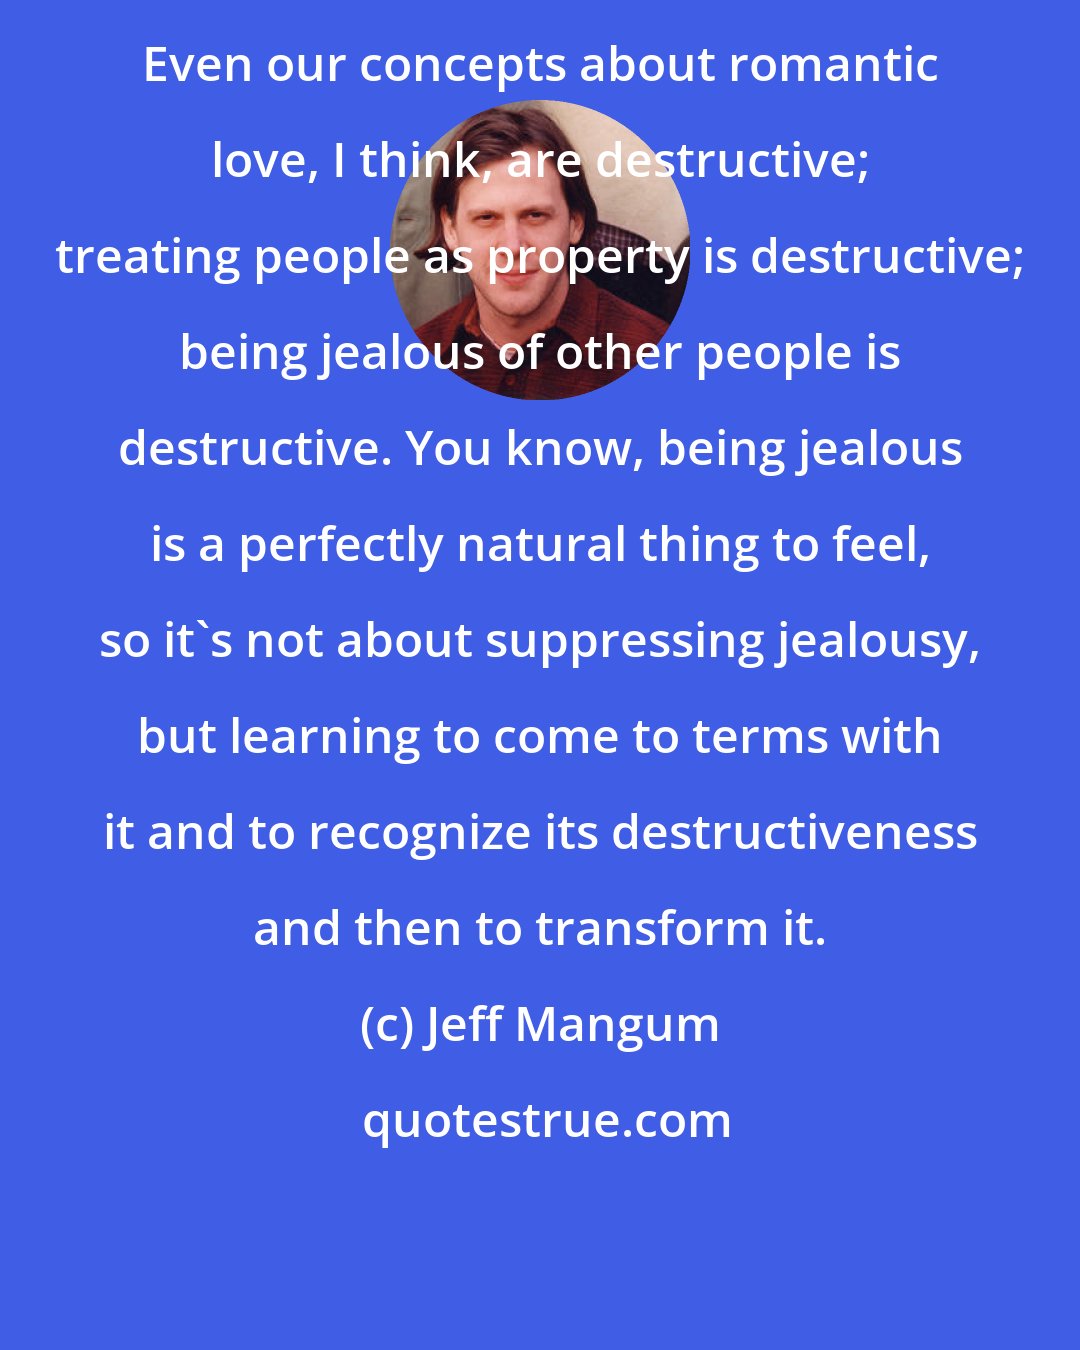 Jeff Mangum: Even our concepts about romantic love, I think, are destructive; treating people as property is destructive; being jealous of other people is destructive. You know, being jealous is a perfectly natural thing to feel, so it's not about suppressing jealousy, but learning to come to terms with it and to recognize its destructiveness and then to transform it.